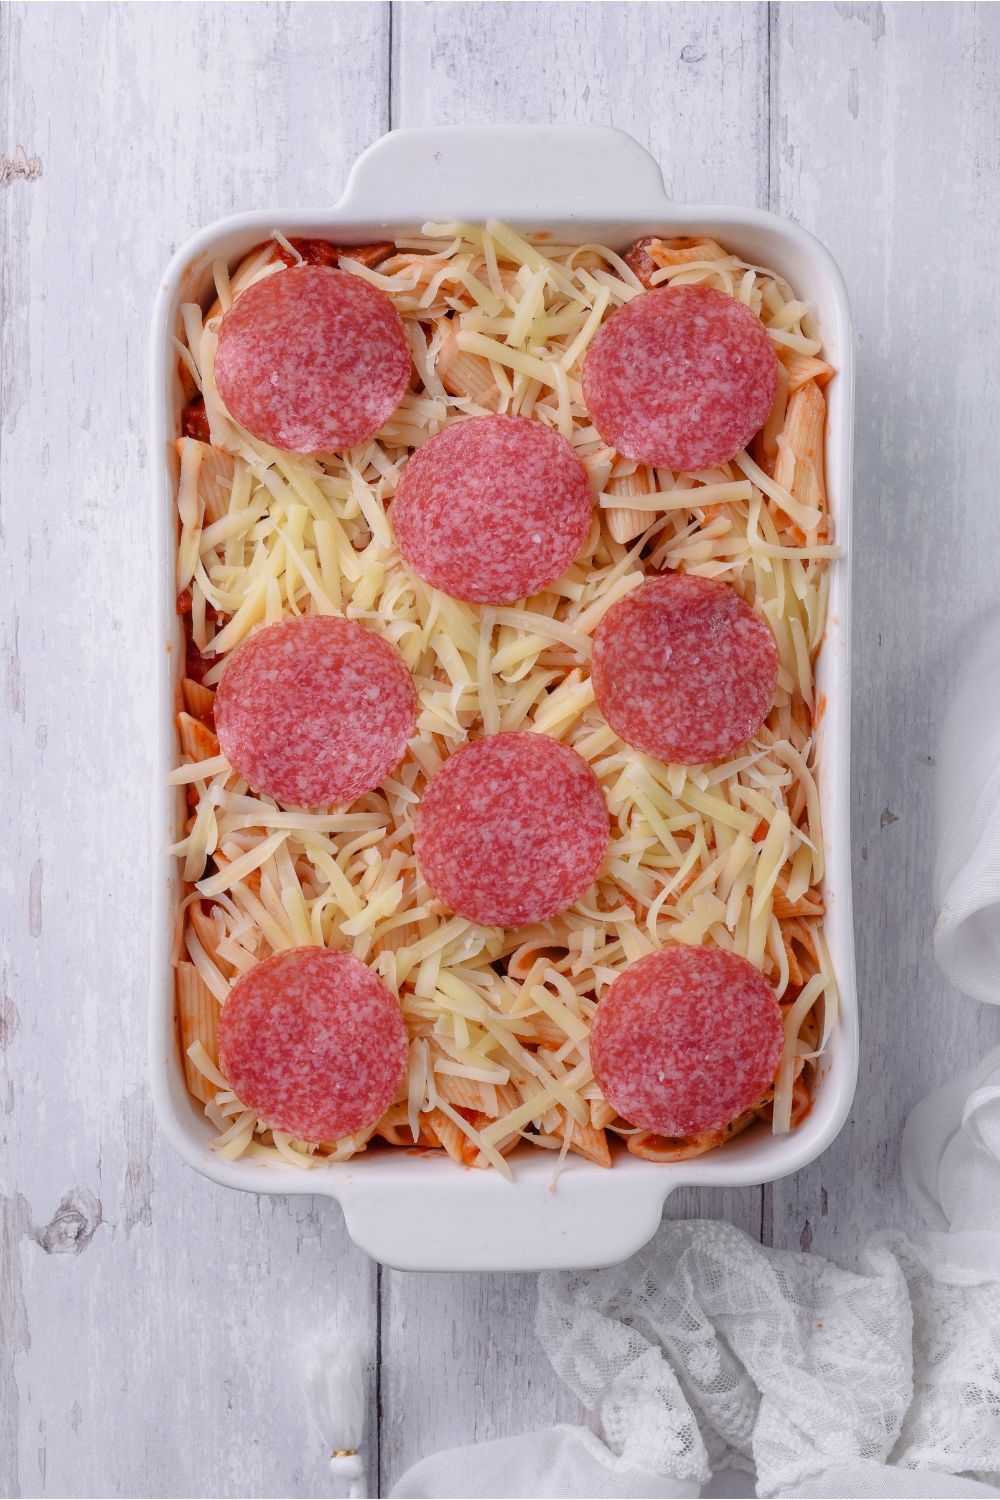 A white baking dish filled with unbaked pasta in red sauce, shredded cheese, and a layer of sliced pepperoni on top.